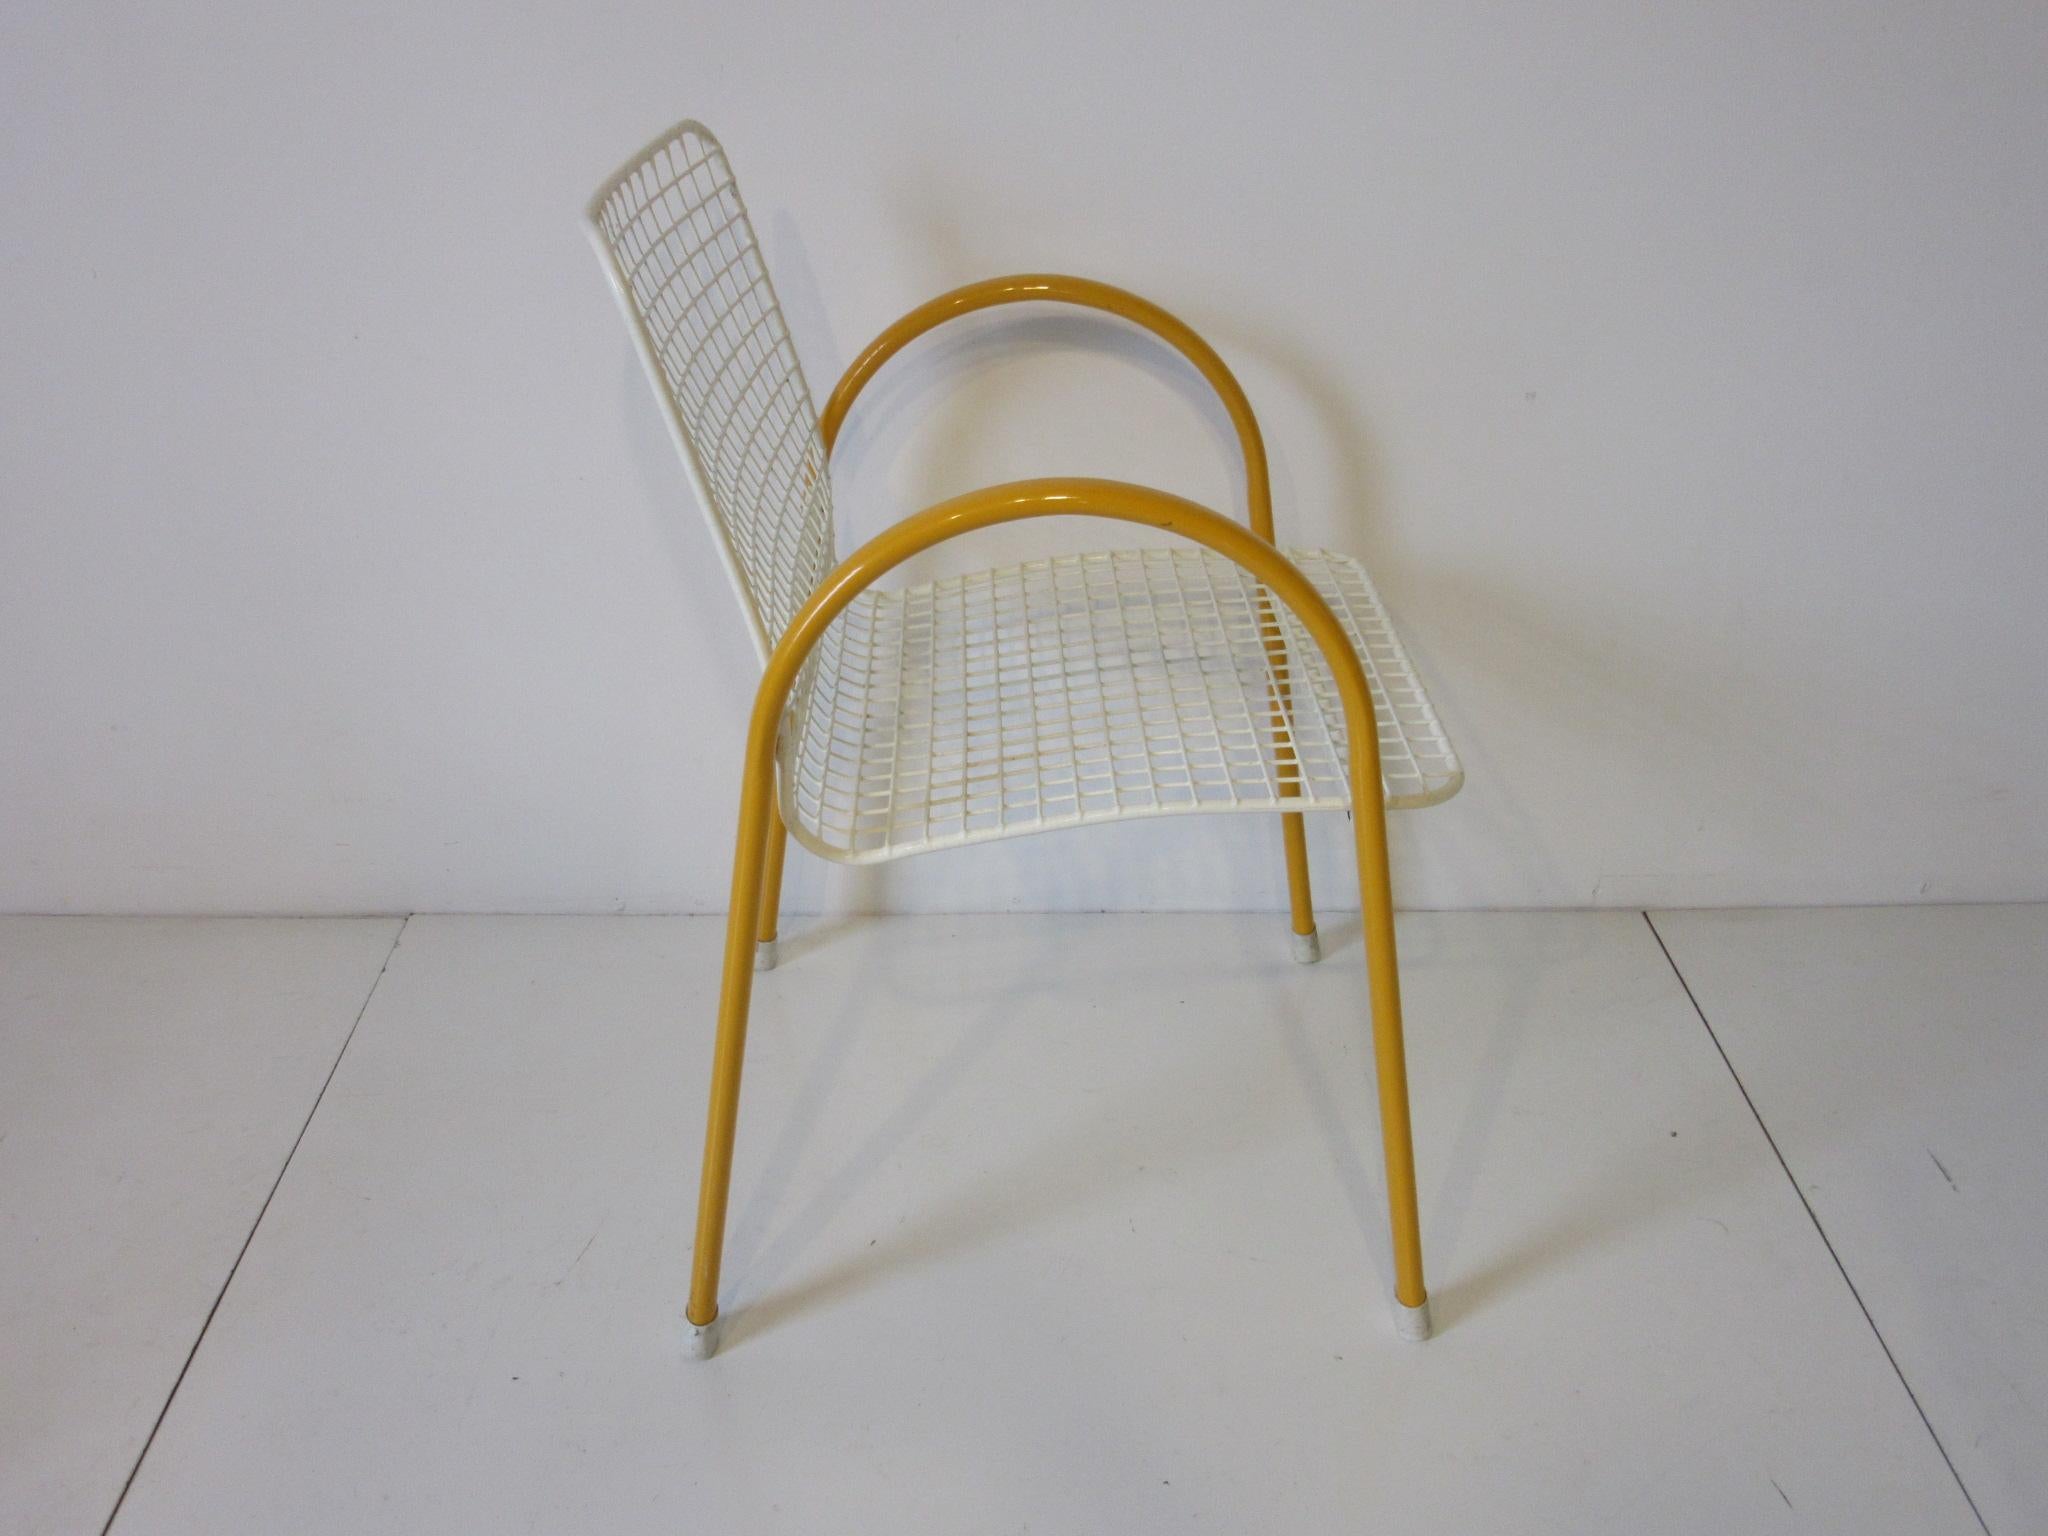 A set of four white wire seated chairs with yellow one piece arching arms and legs with rubber end caps for feet. These chair stack nicely and have a coated finish for protection, retains the manufactures label made in Italy by the EMU furniture